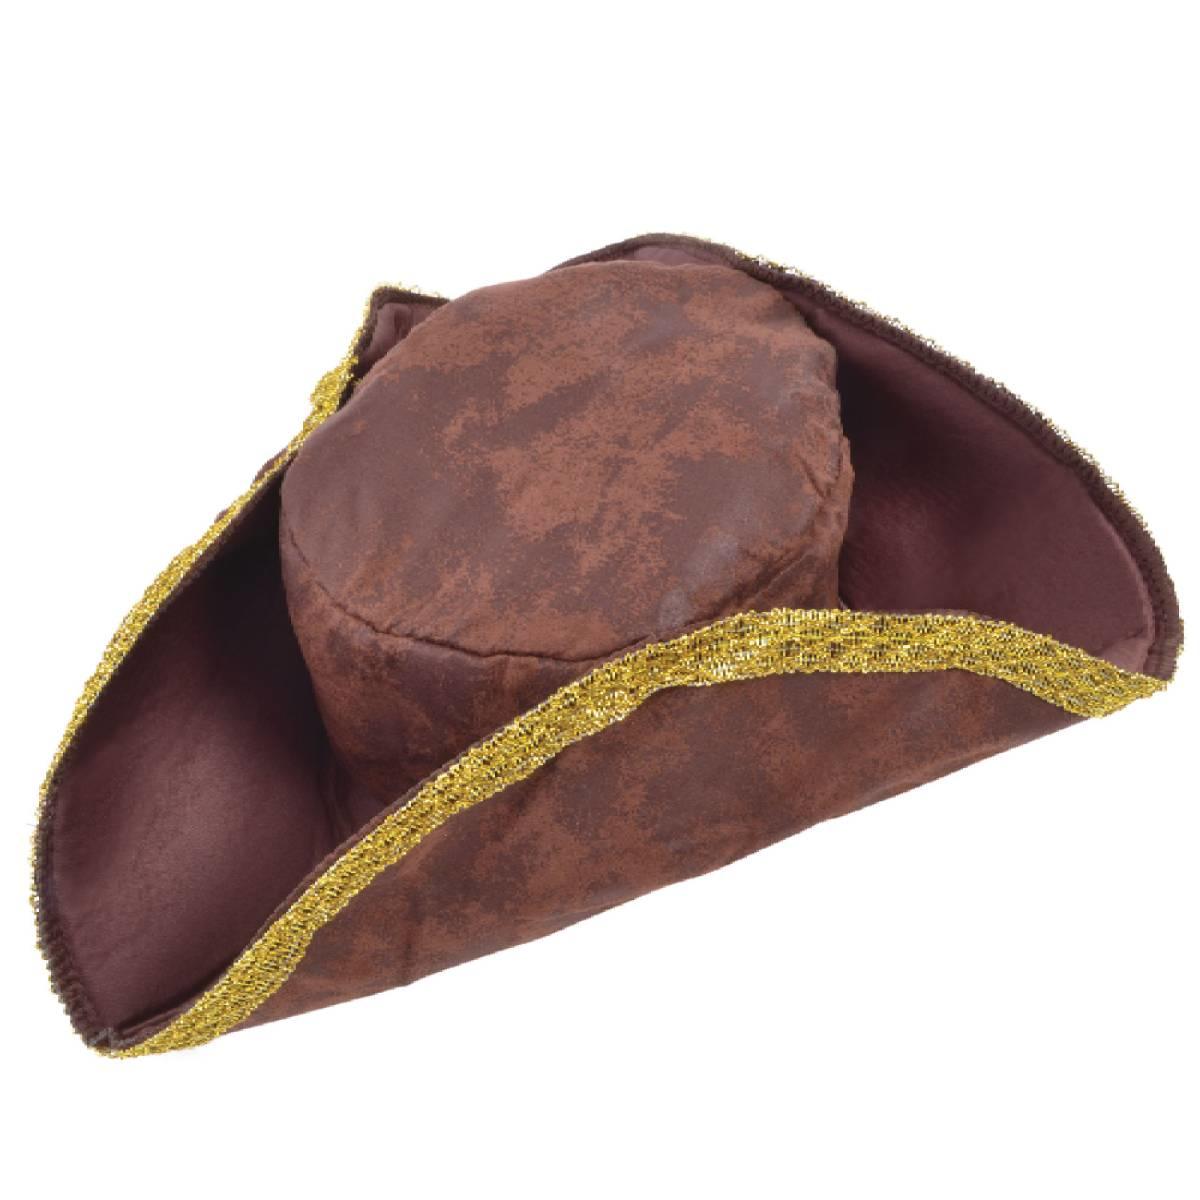 Distressed and Crumpled Suede Caribbean Pirate Hat for Adults in Brown BH418 available here at Karnival Costumes online party shop